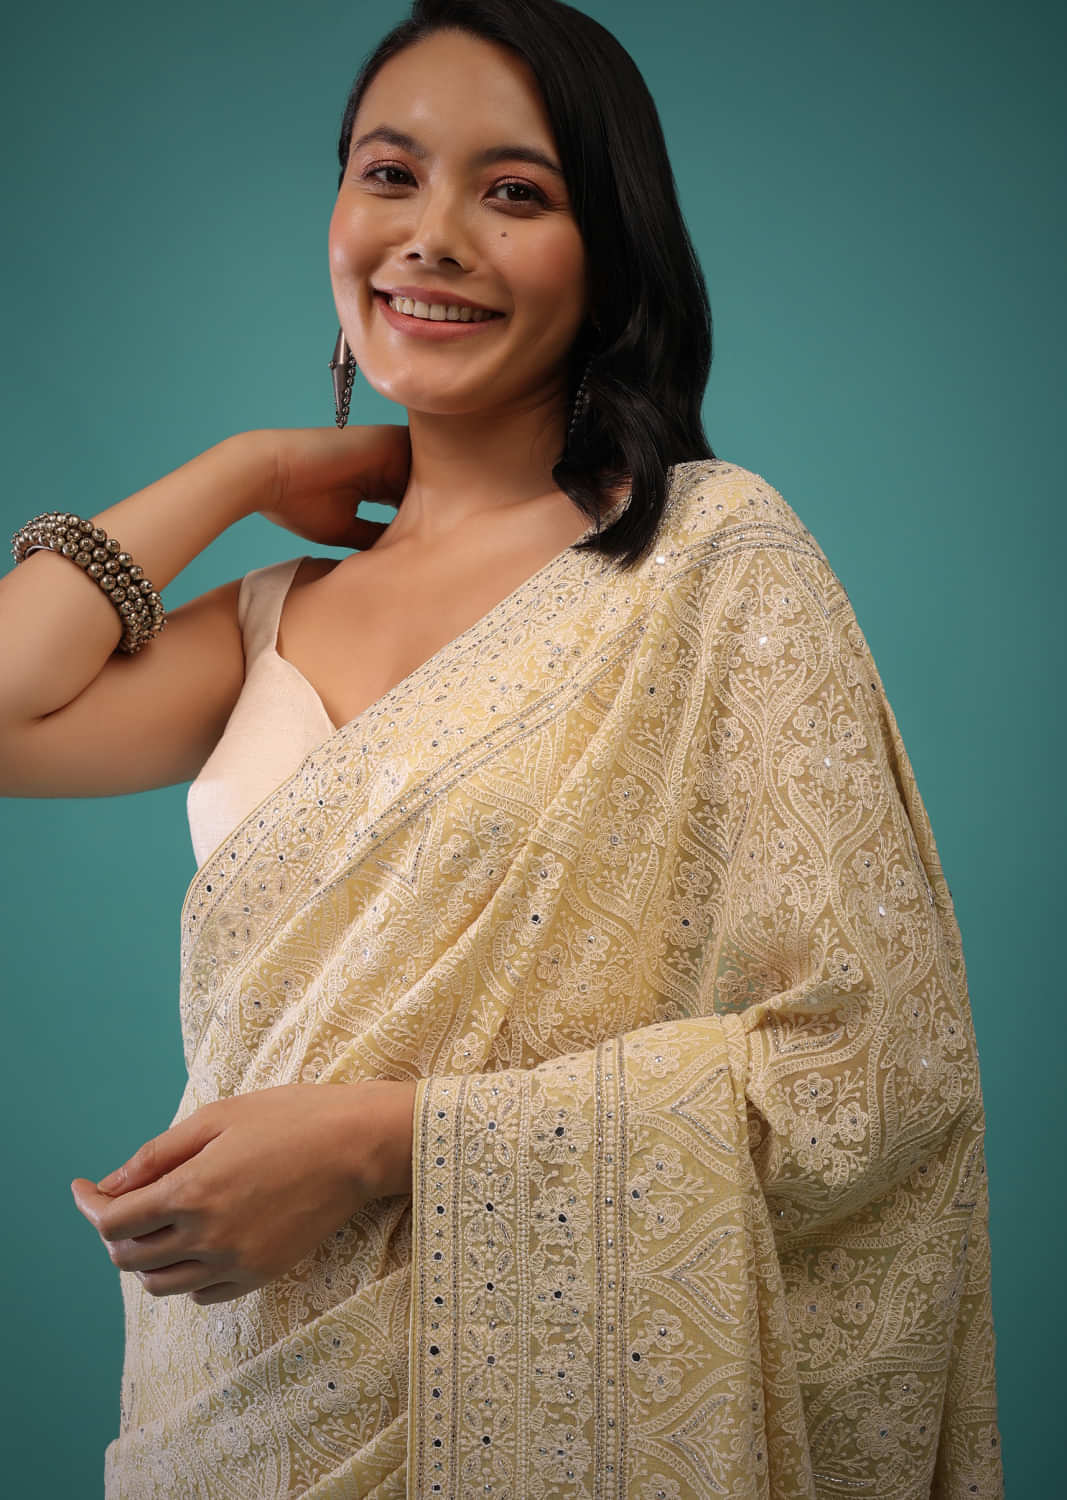 Lemon Drop Saree In Lucknowi Threadwork In A Moroccan Jaal, Mirror And Cut Dana Embroidery Detailing On The Pallu